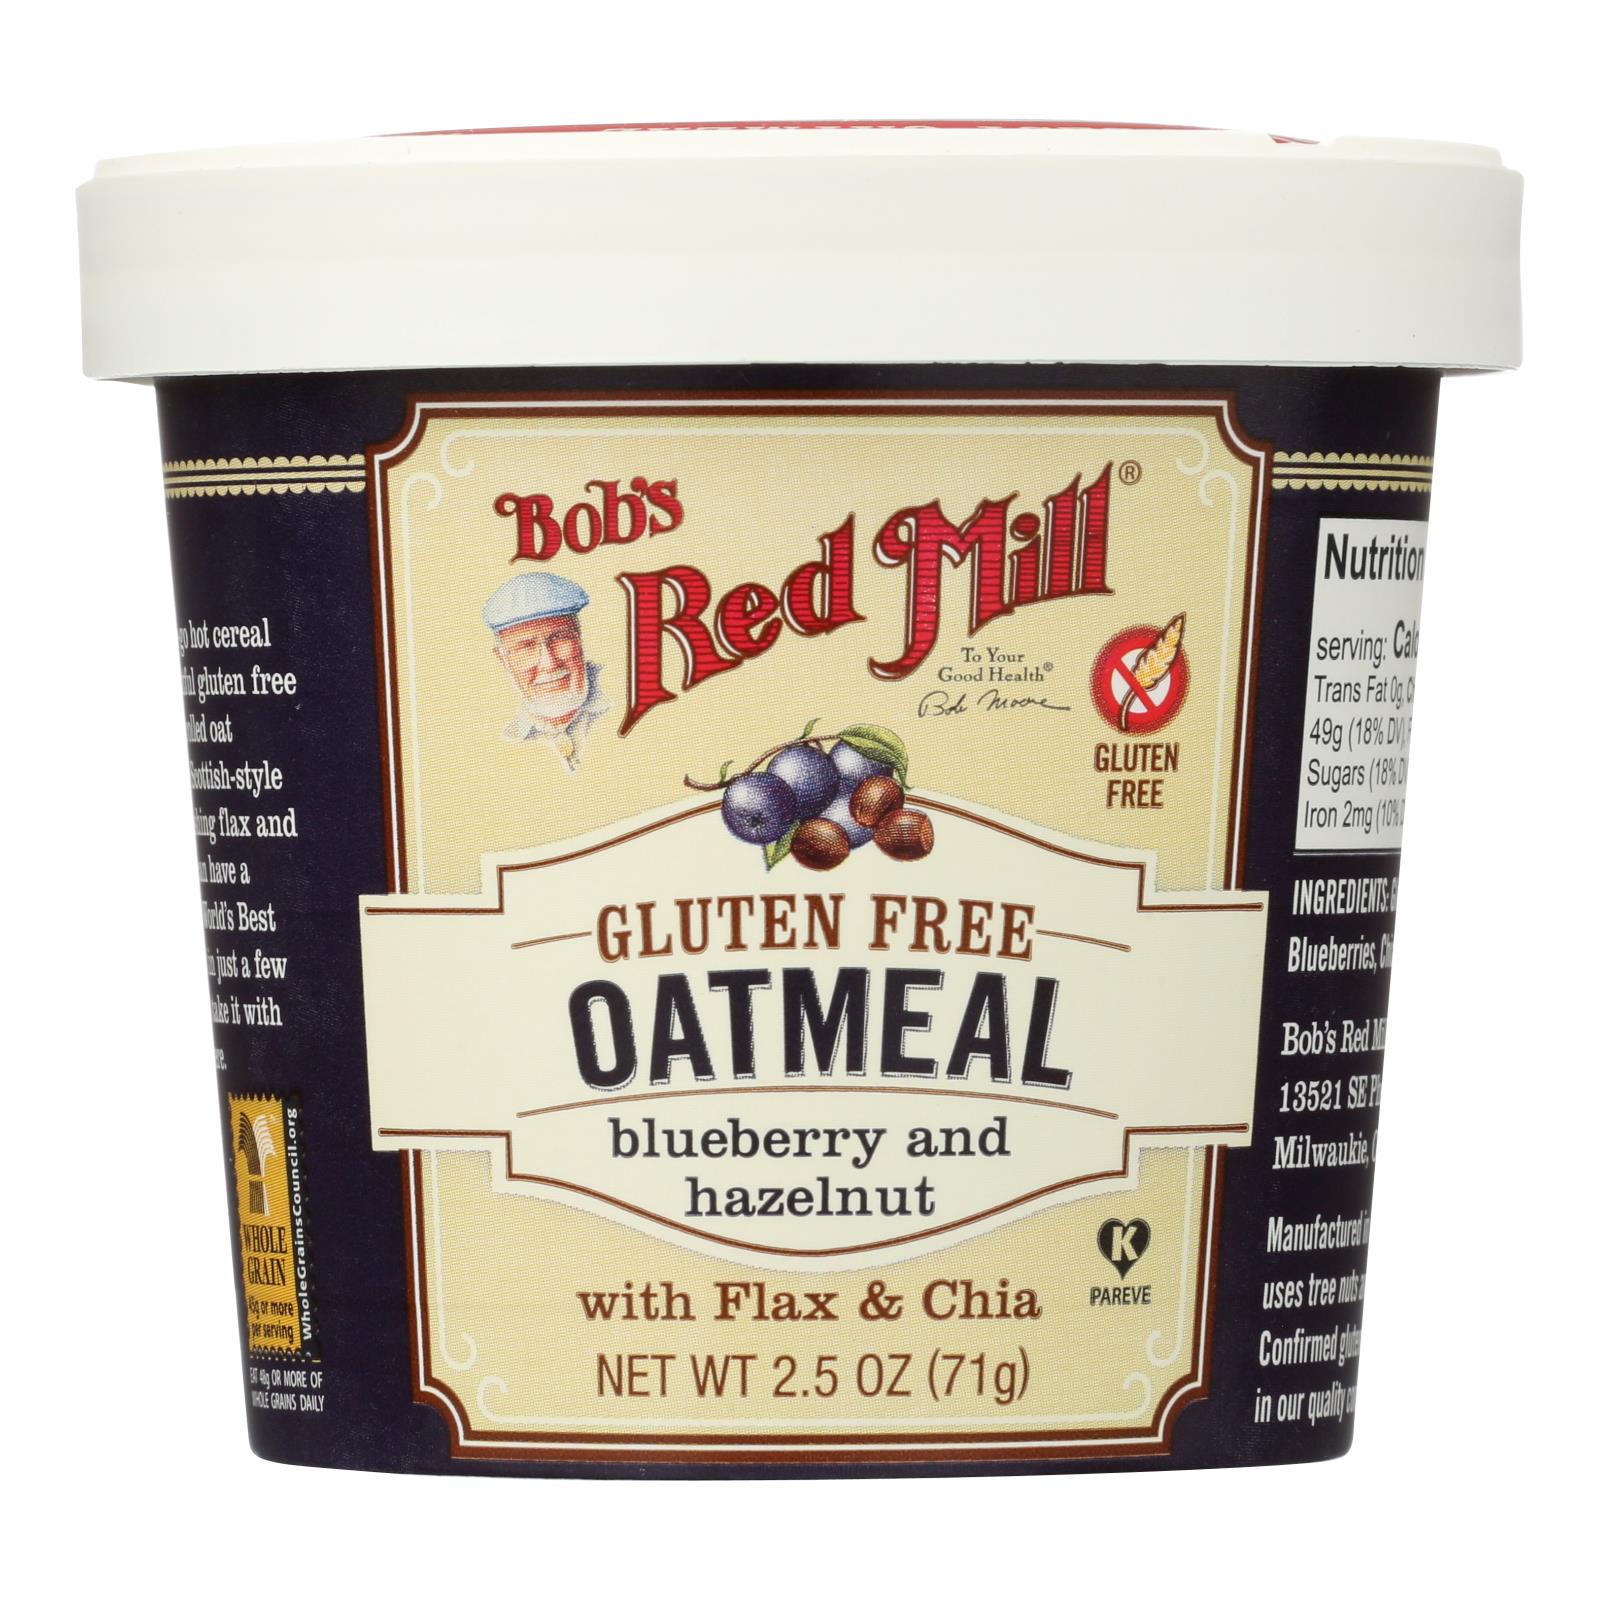 Bob's Red Mill - Gluten Free Oatmeal Cup Blueberry And Hazelnut - 2.5 Oz - Case Of 12